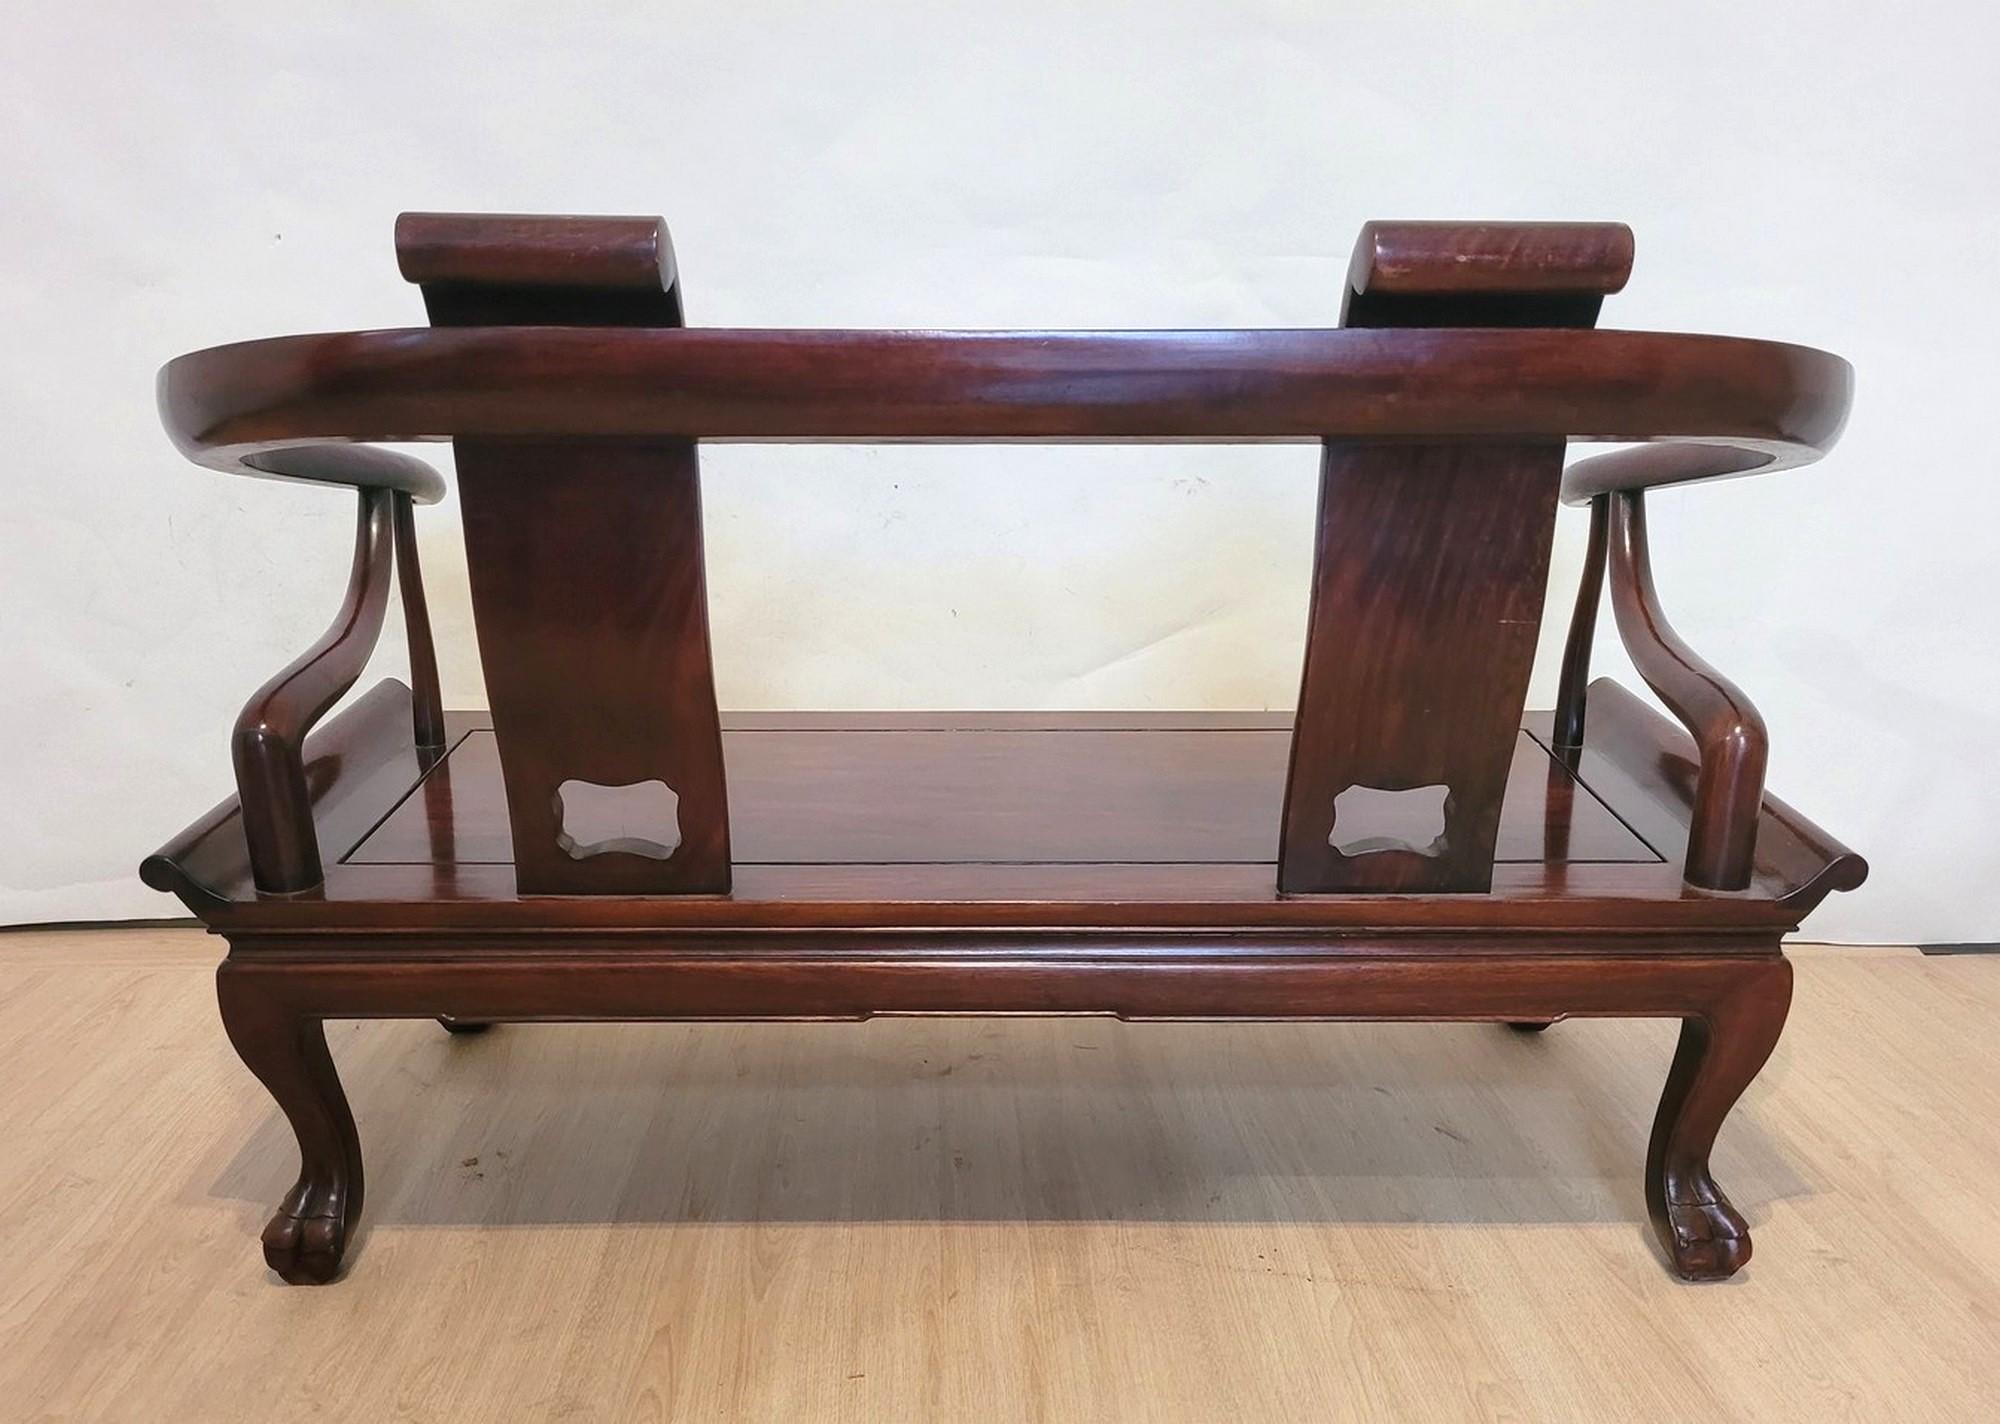 Chinese Carved Wood Bench, Late 19th Early 20th Century For Sale 6